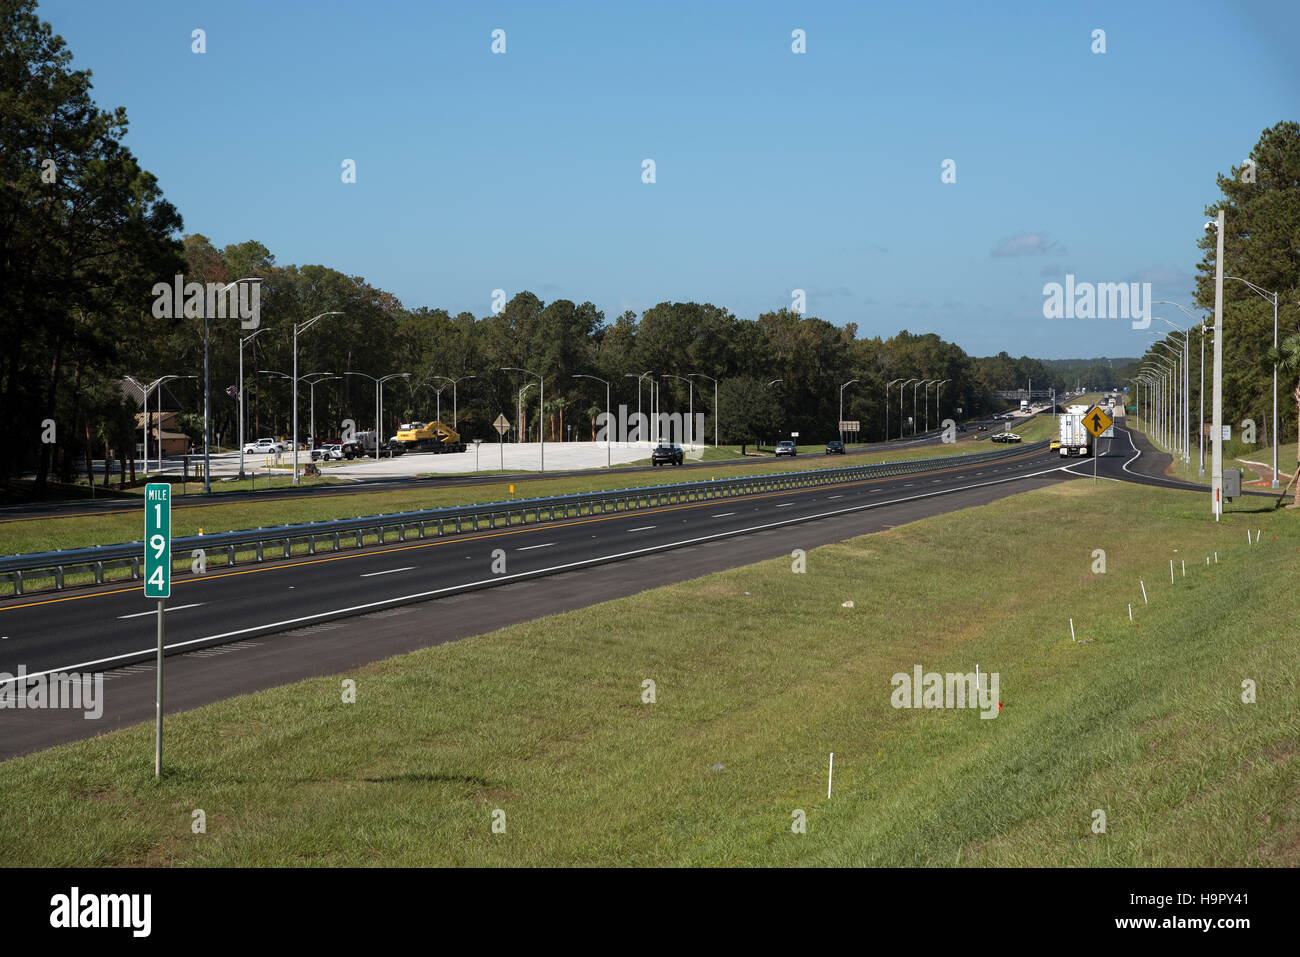 The Interstate 10 highway at Tallahassee Florida USA - Interstate highway viewed from a rest stop looking west Stock Photo